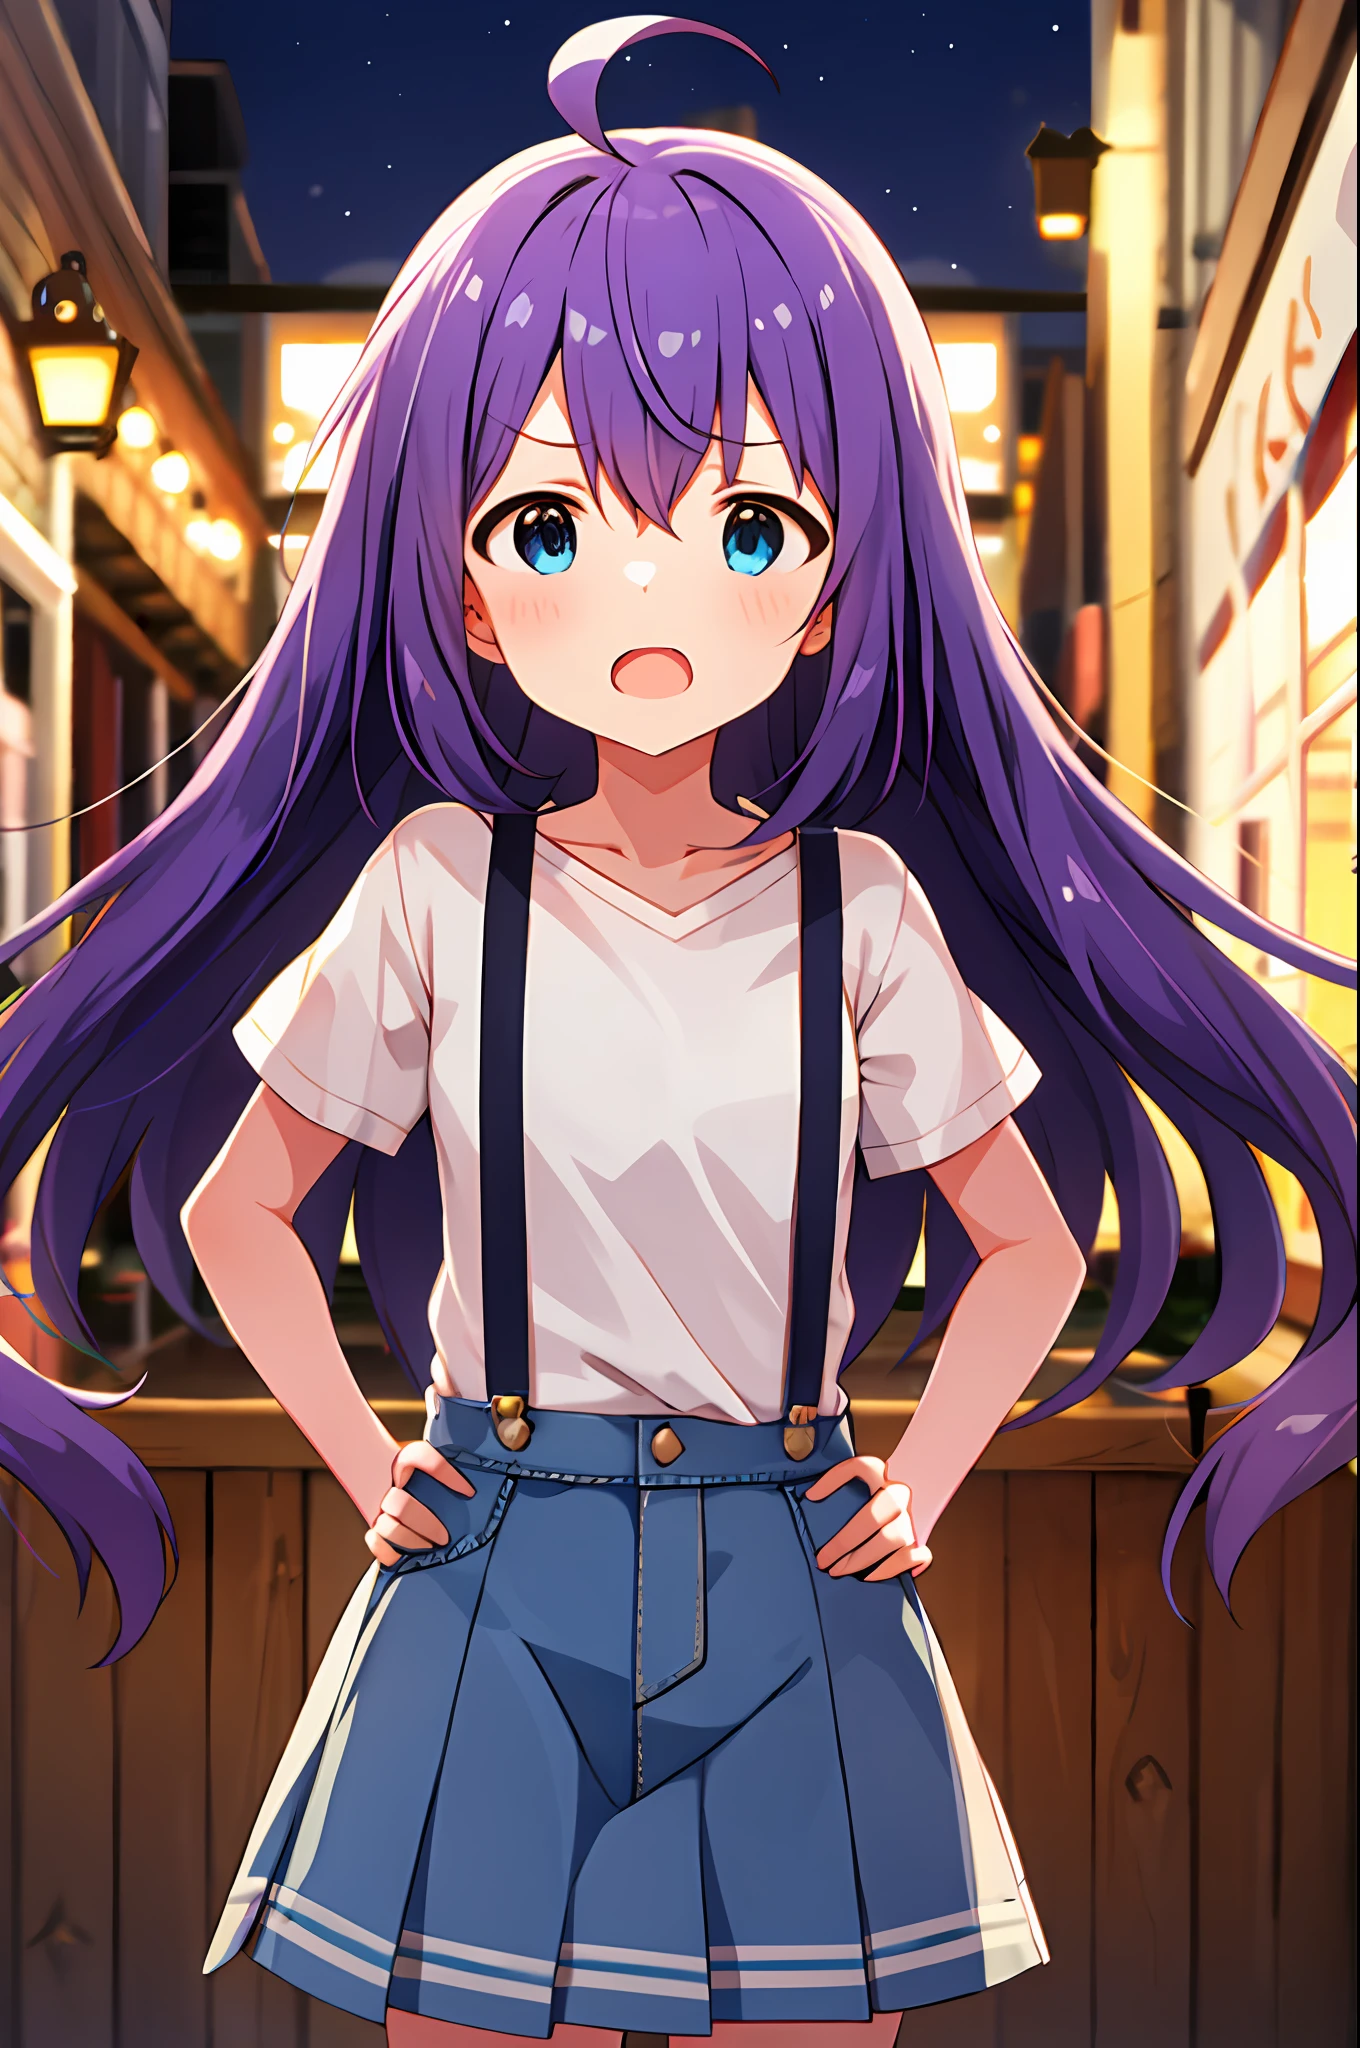 mochizuki anna,1girls,Solo,Long hair,Purple hair,Small_Ahoge,Blue eyes.Short stature.white t-shirts.suspenders.Skirt.Night view.Despair face.Clench your fists.Opening Mouth.hands on hip.